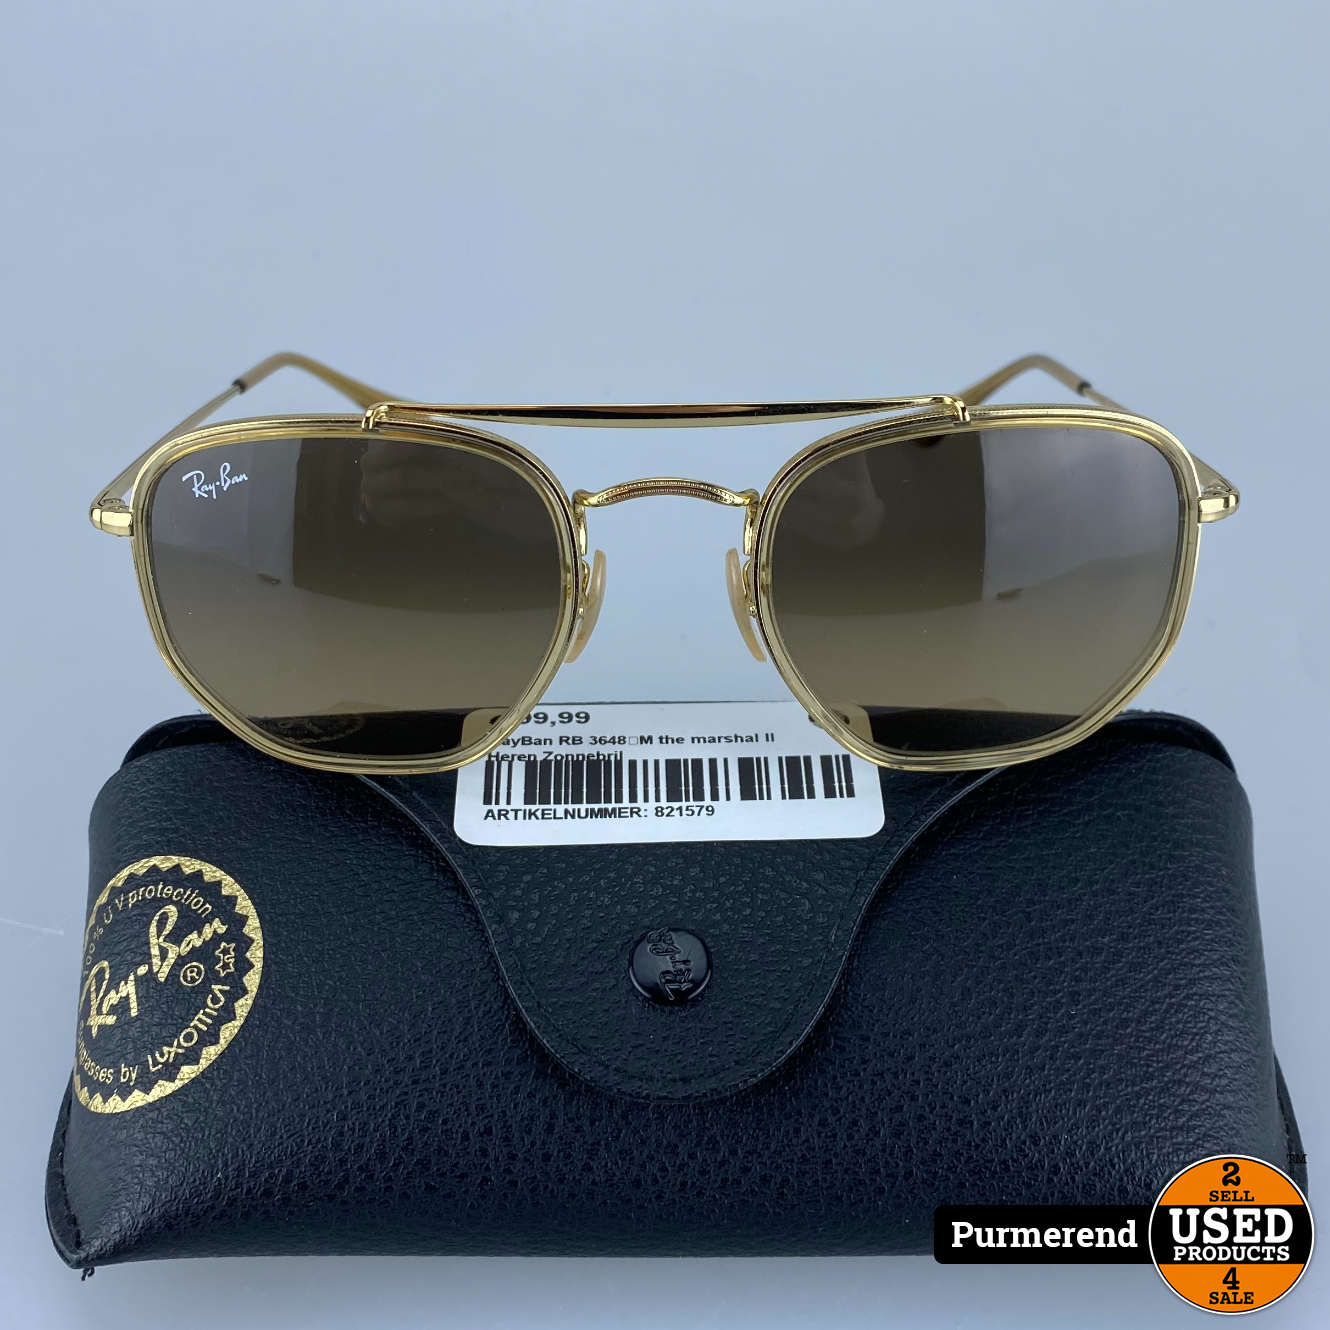 Afwezigheid Migratie type RayBan RB 3648‑M the marshal II Heren Zonnebril - Used Products Purmerend